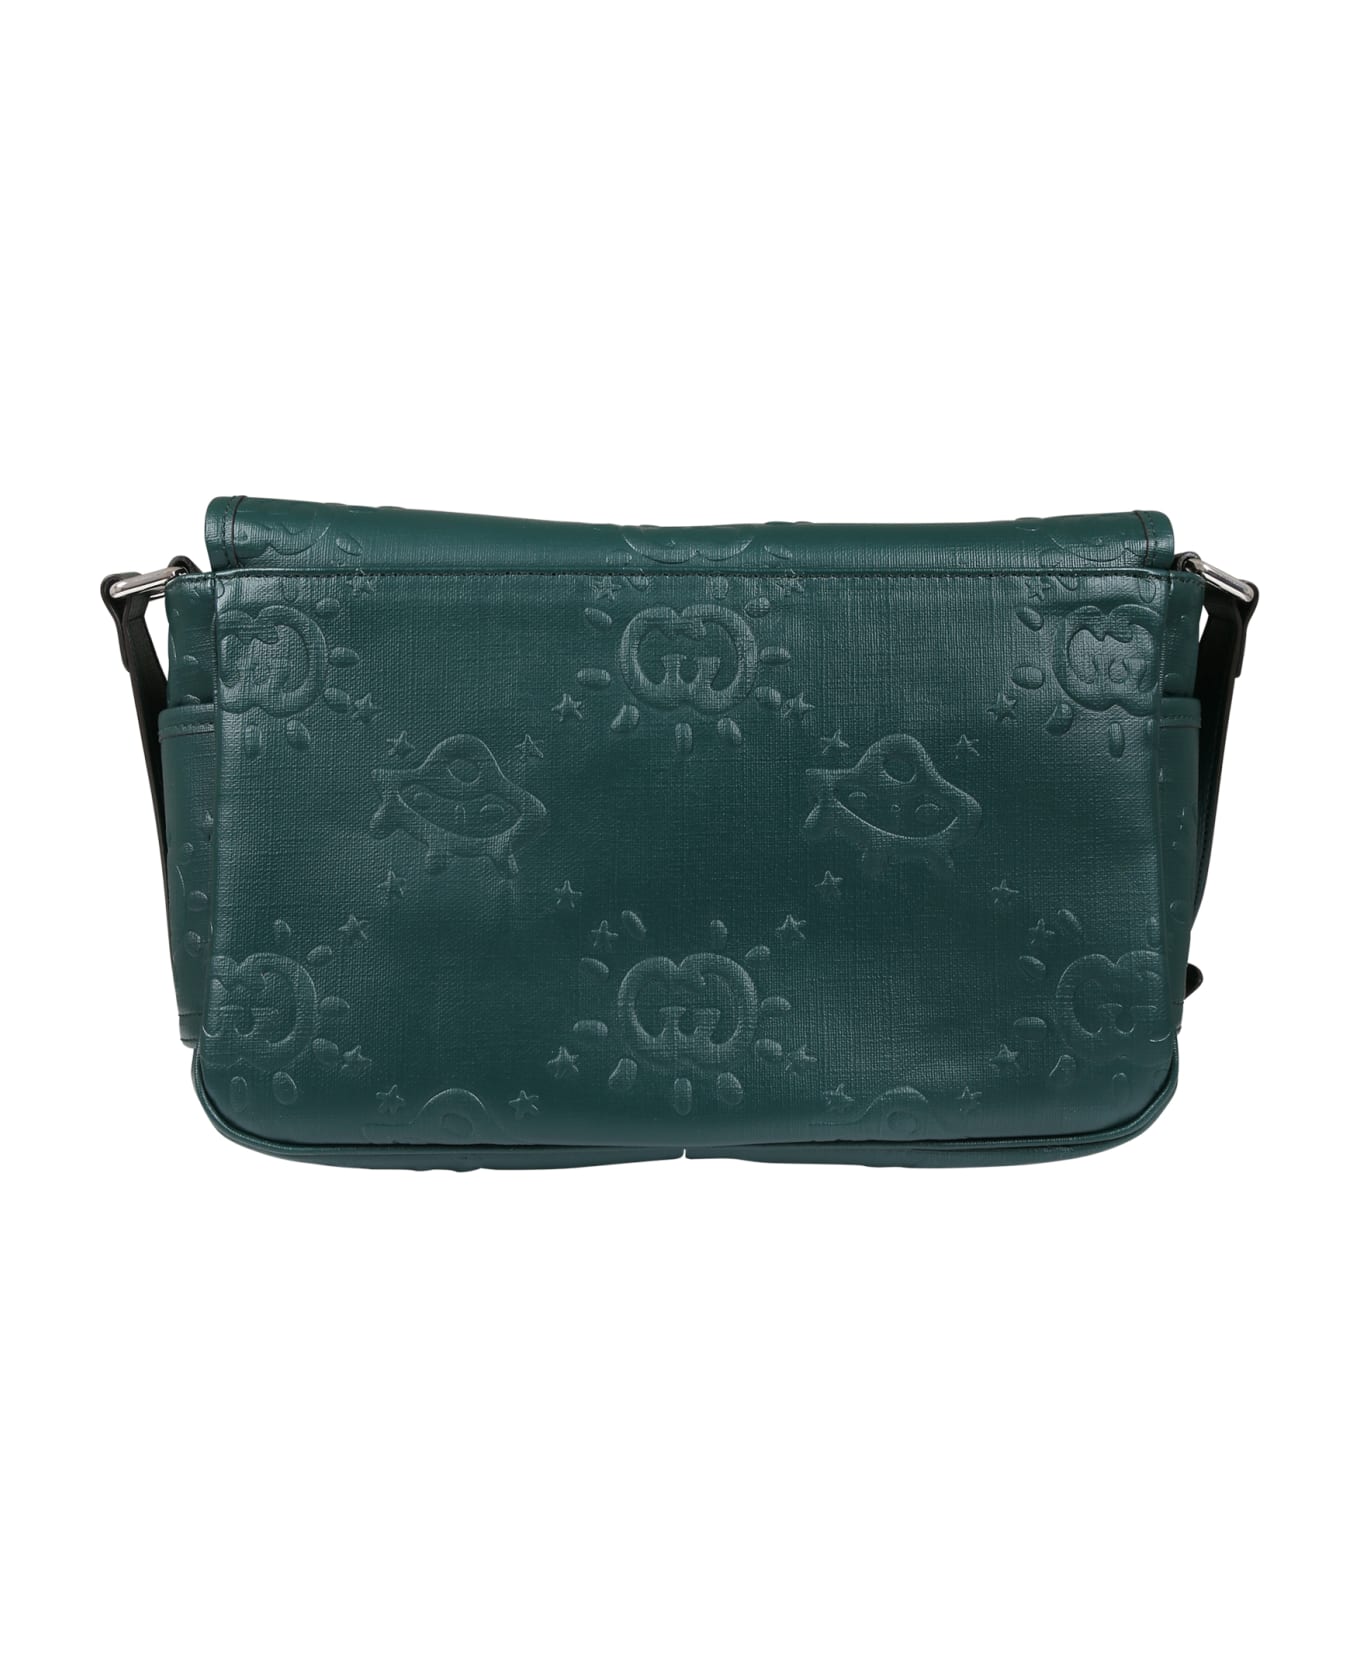 Gucci Green Bag For Girl With Gg Cross - Green